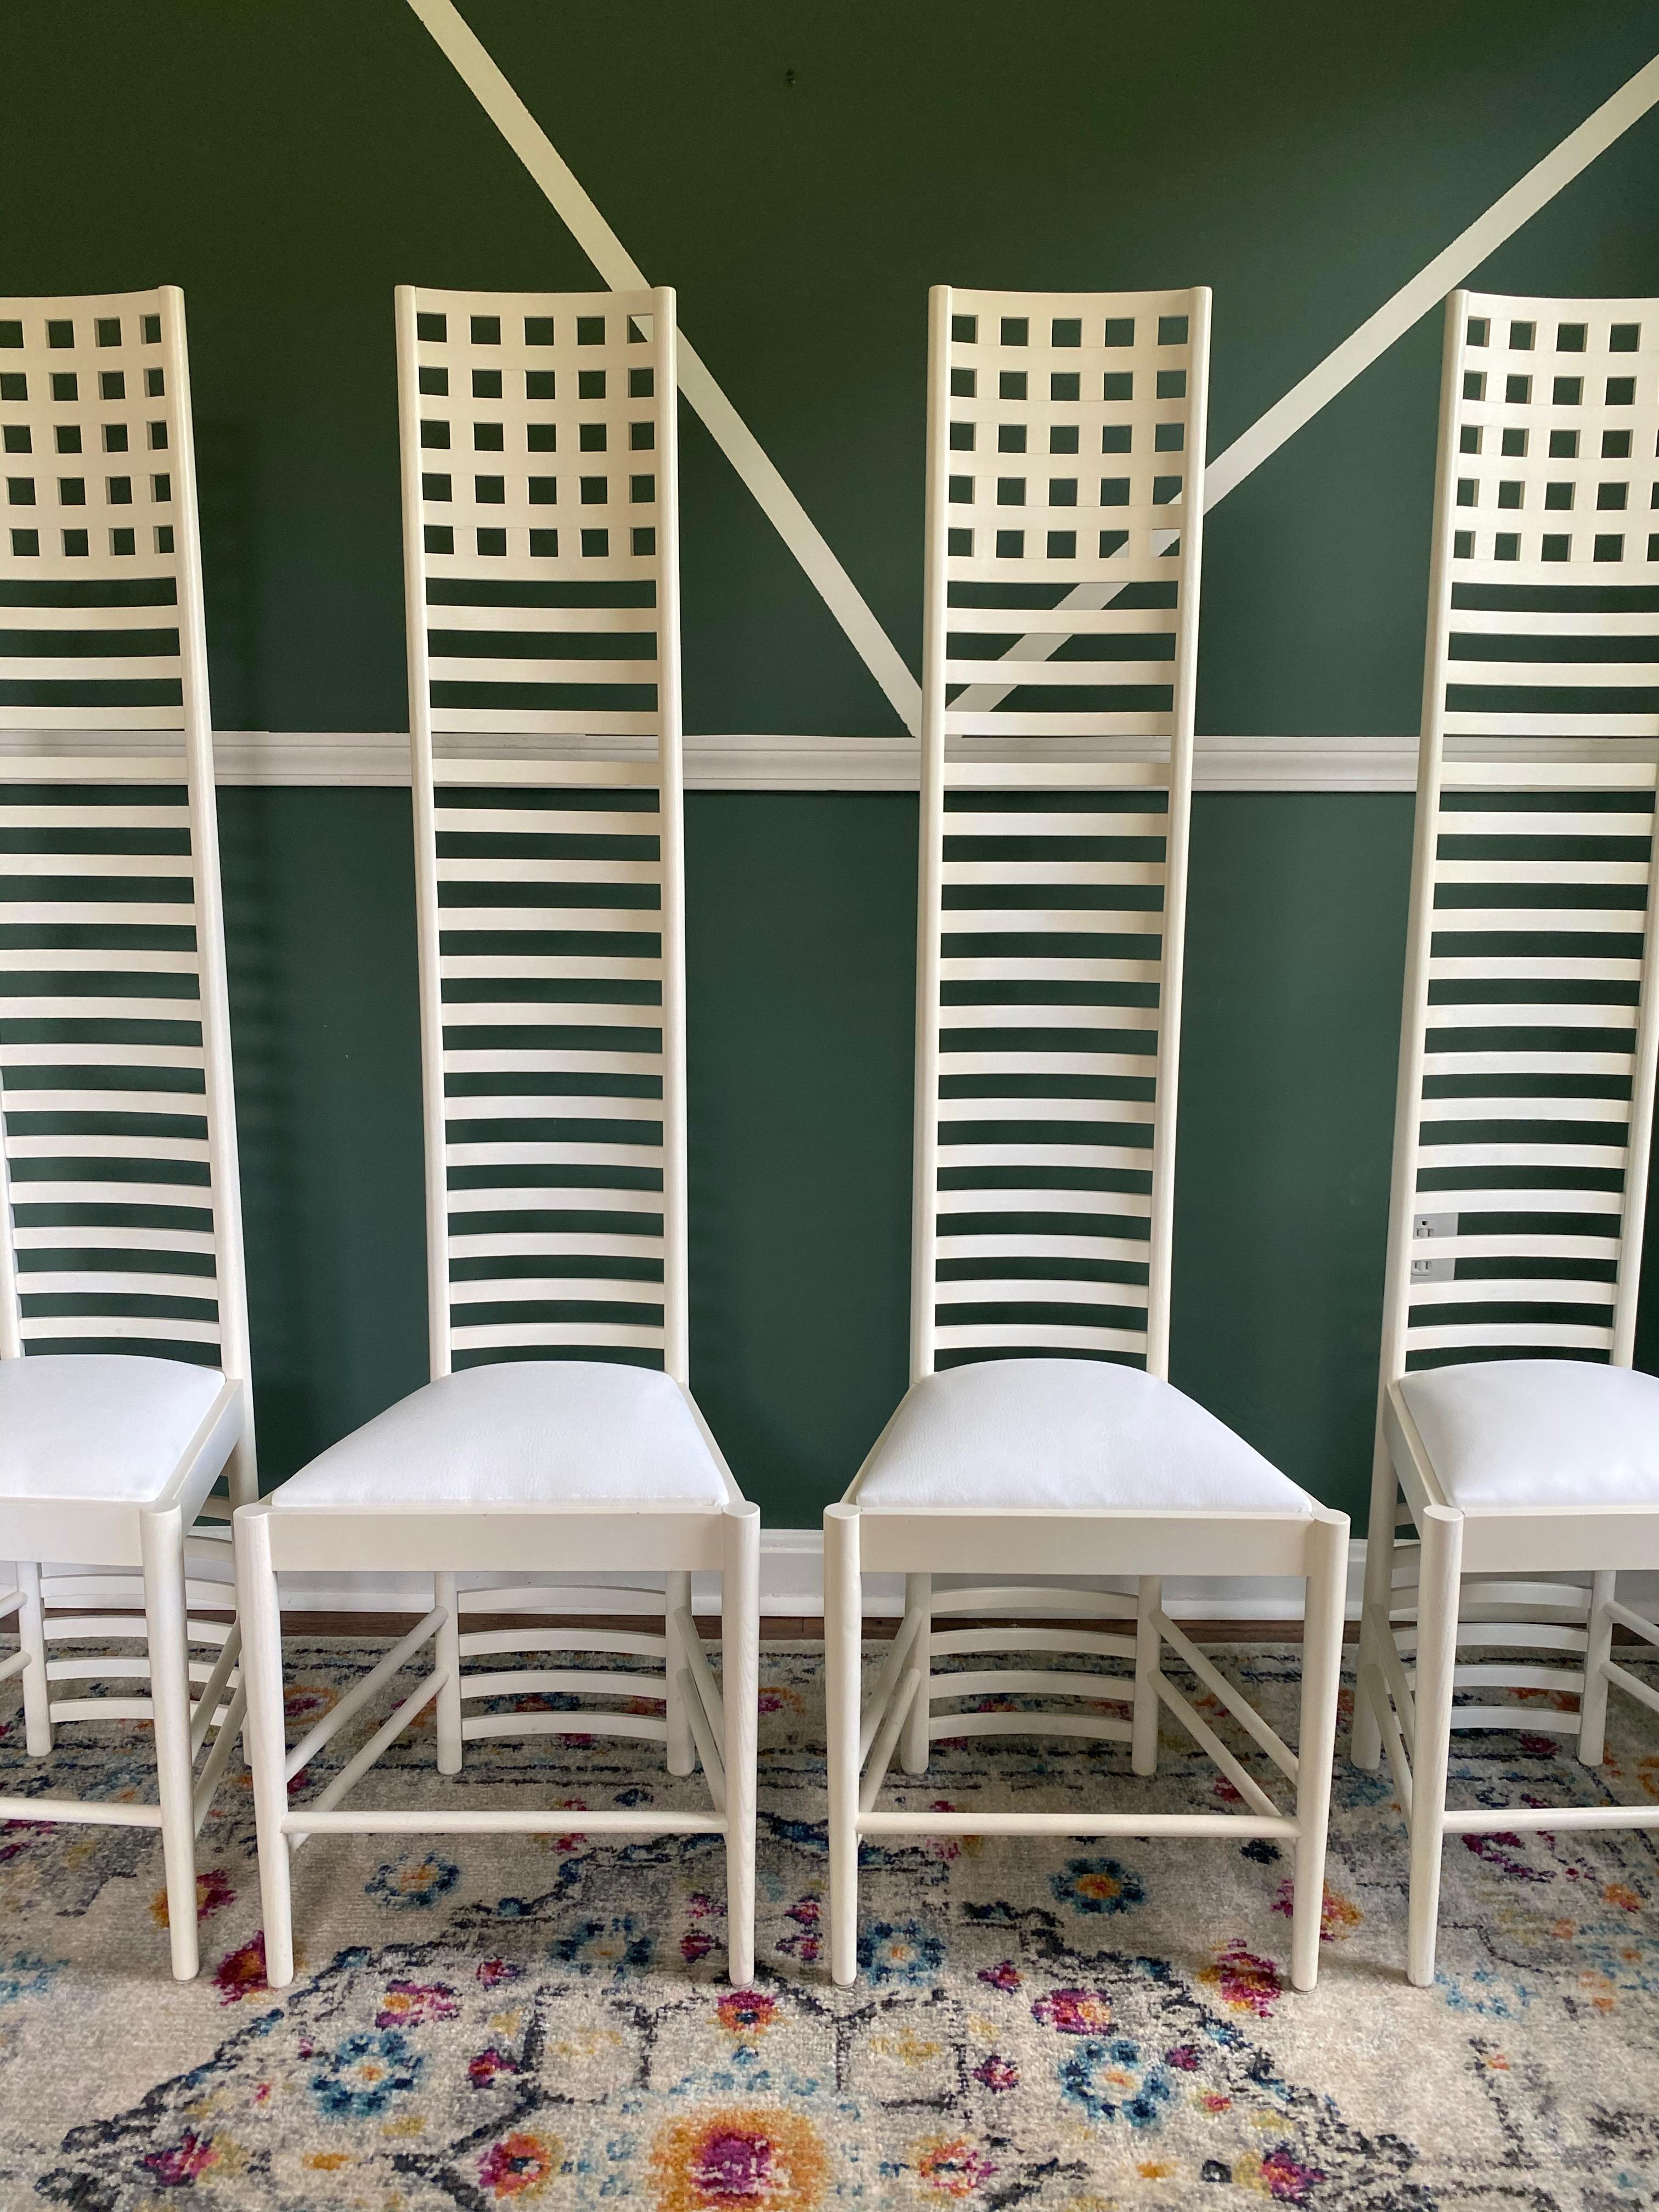 Hard to find..Set of four Charles Rennie Mackintosh-Style high back chairs (by Gordon MFG) reupholstered in white vegan leather. These chairs are made with beautiful white lacquered wood (that was also touched up). These skinny, tall chairs are a